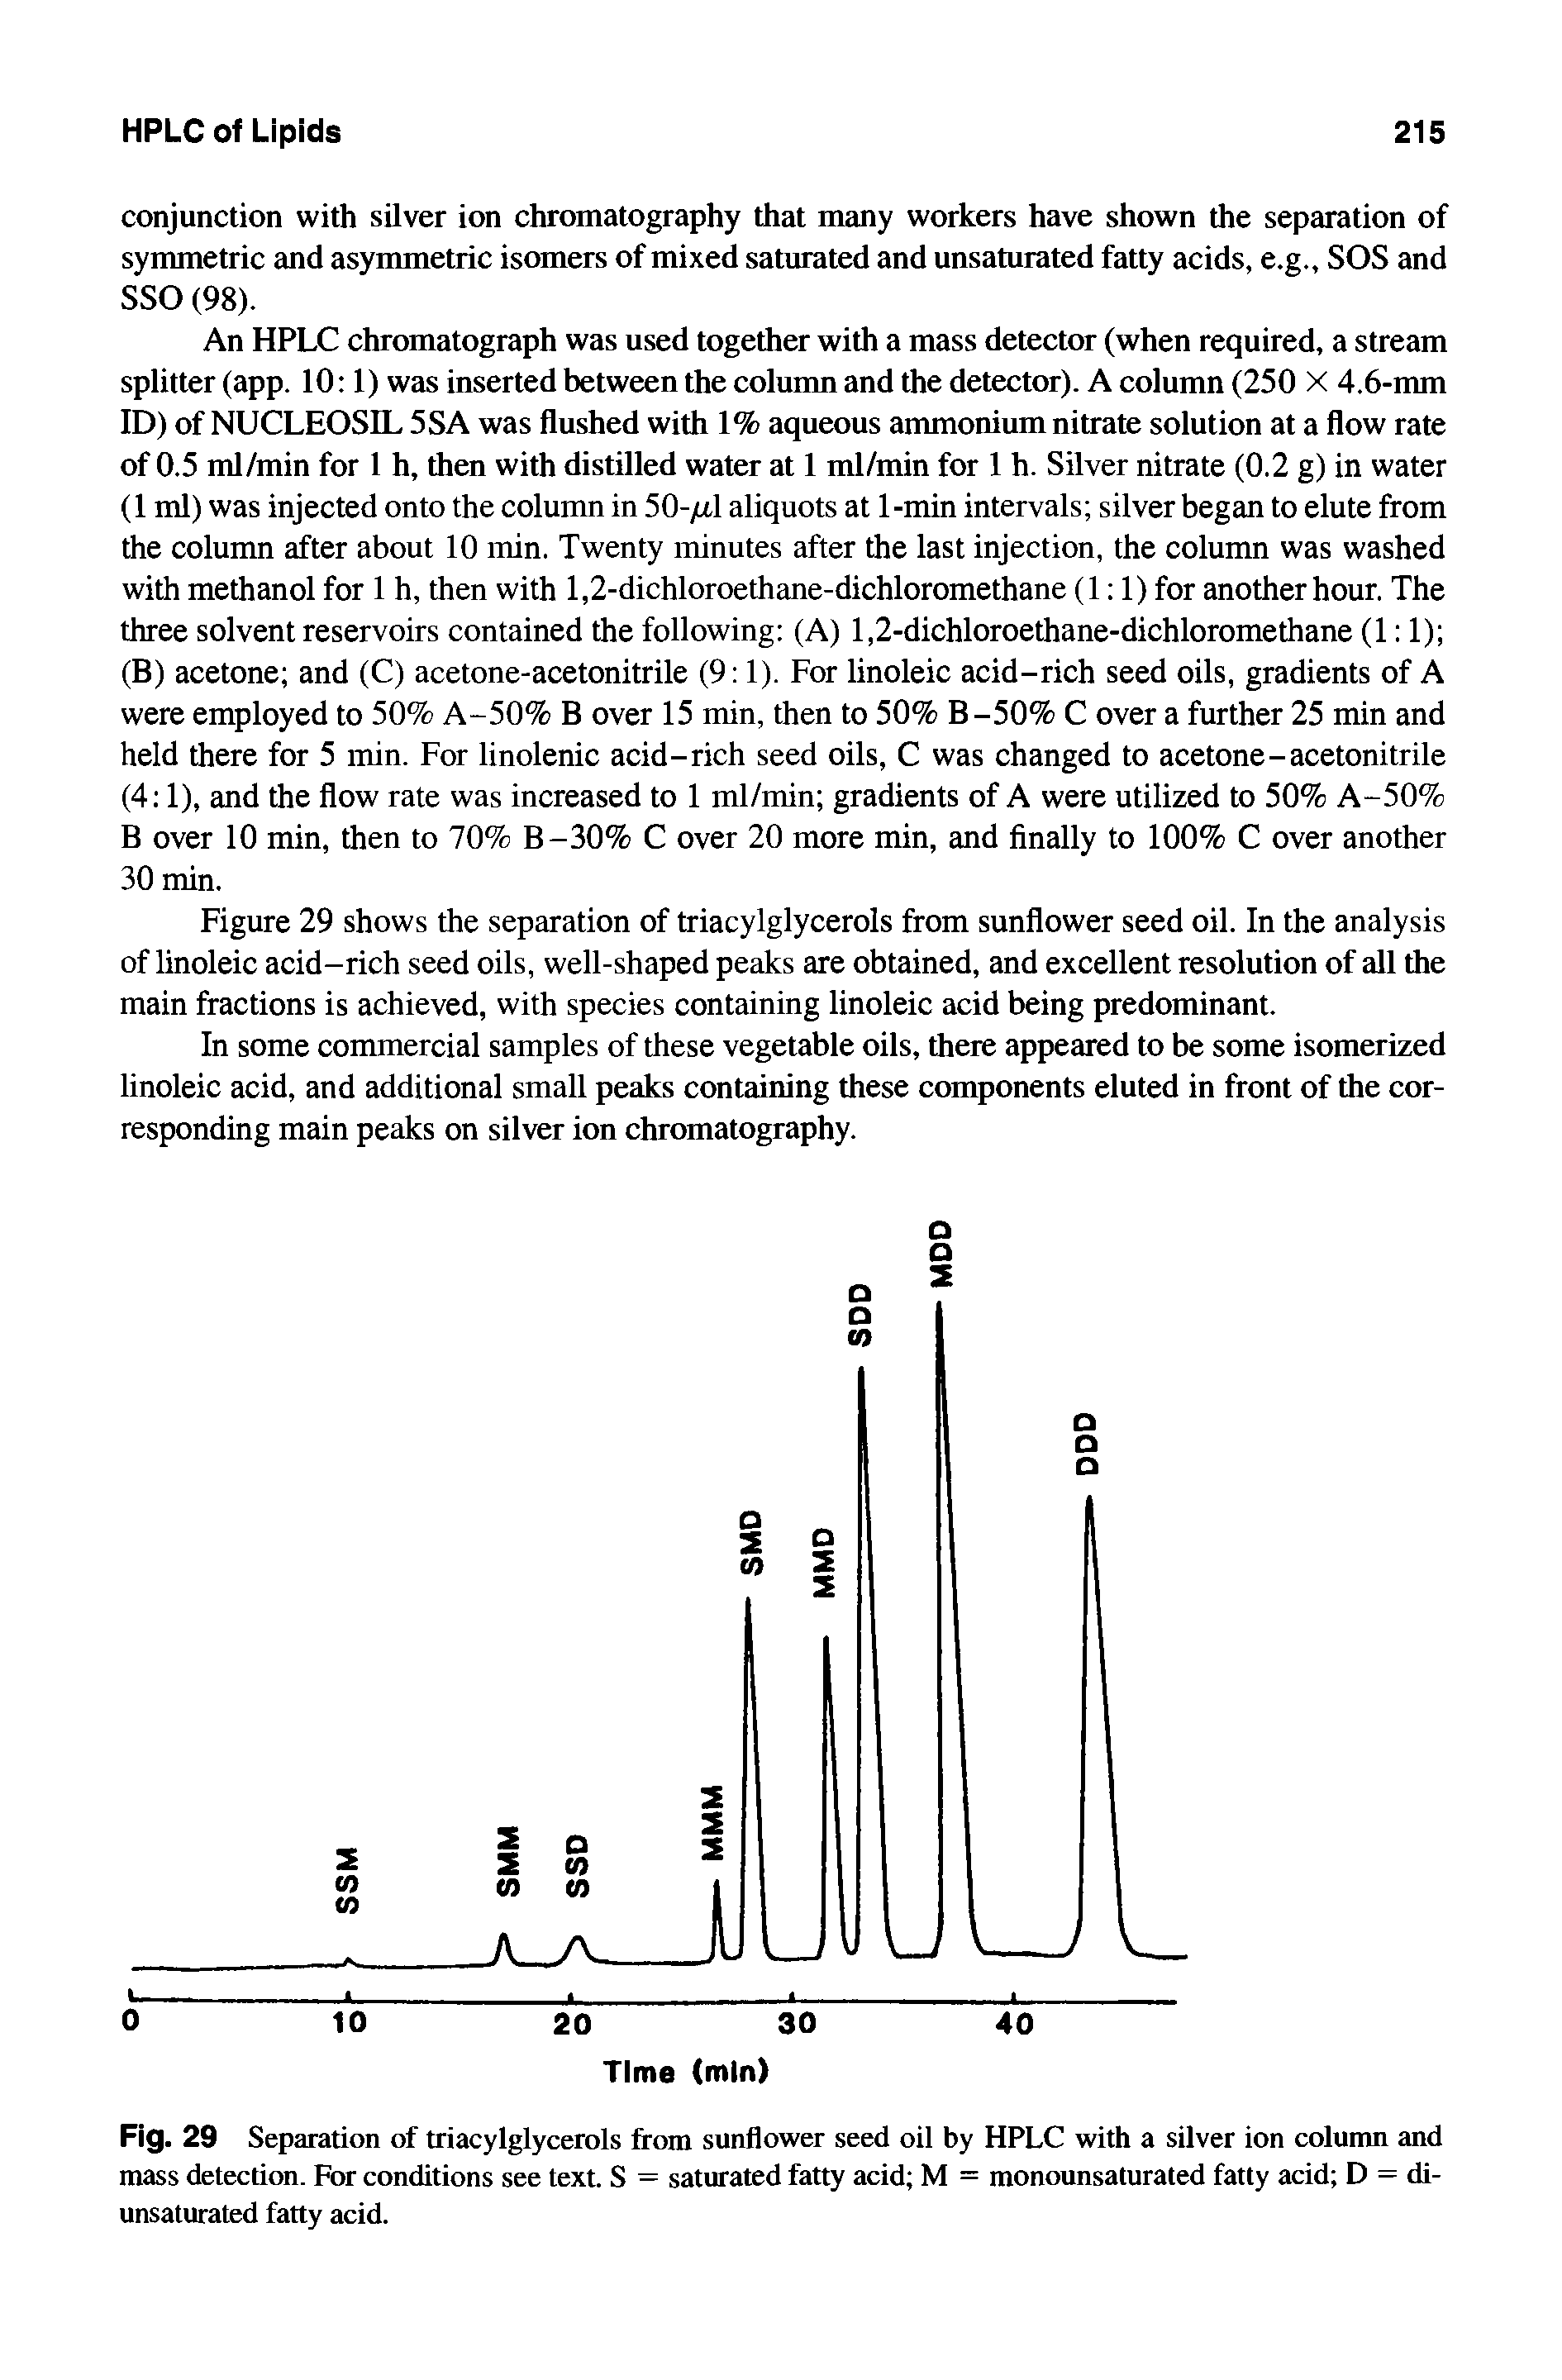 Fig. 29 Separation of triacylglycerols from sunflower seed oil by HPLC with a silver ion column and mass detection. For conditions see text. S = saturated fatty acid M = monounsaturated fatty acid D = di-unsaturated fatty acid.